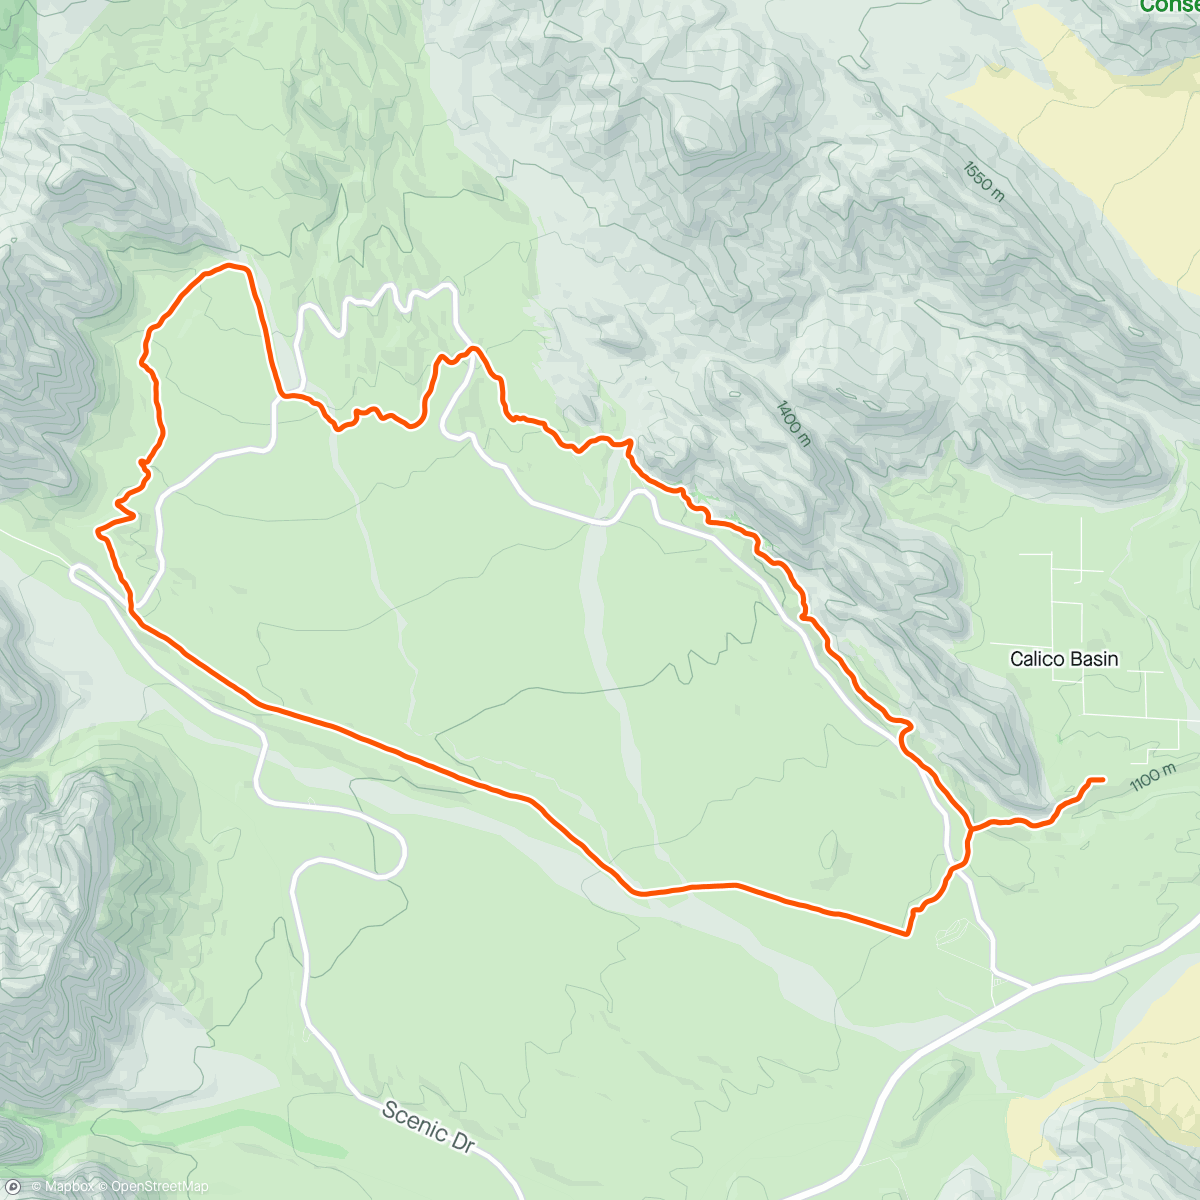 Mappa dell'attività Well if I can’t be climbing Everest yet, this is a decent Plan B. Running in the desert w/ Alex!